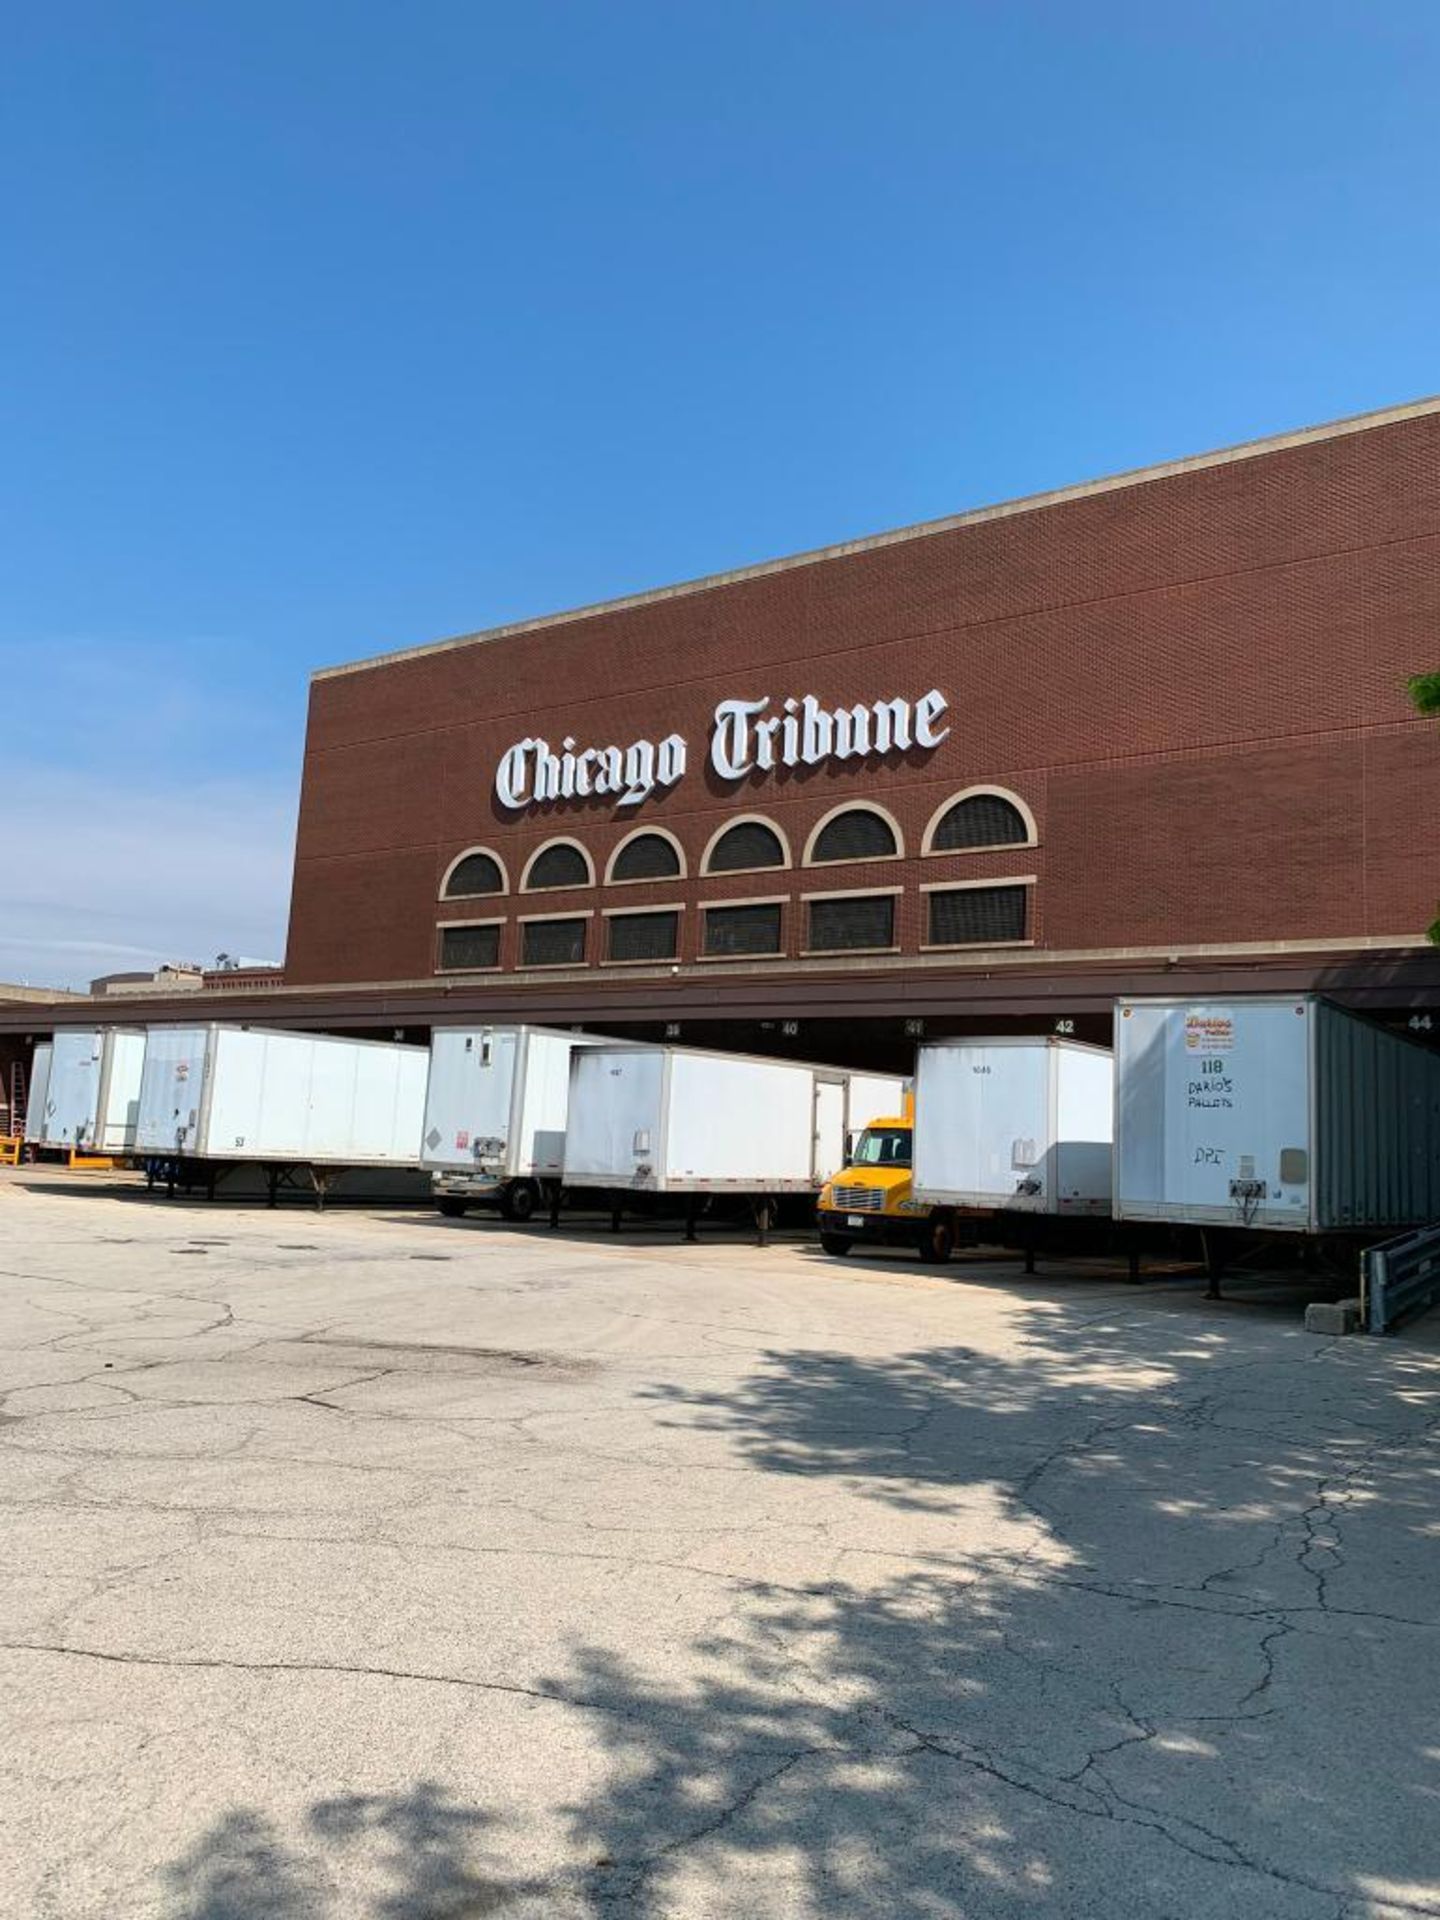 Large Chicago Tribune Sign (Located on the South Side of the Building) - Image 2 of 3